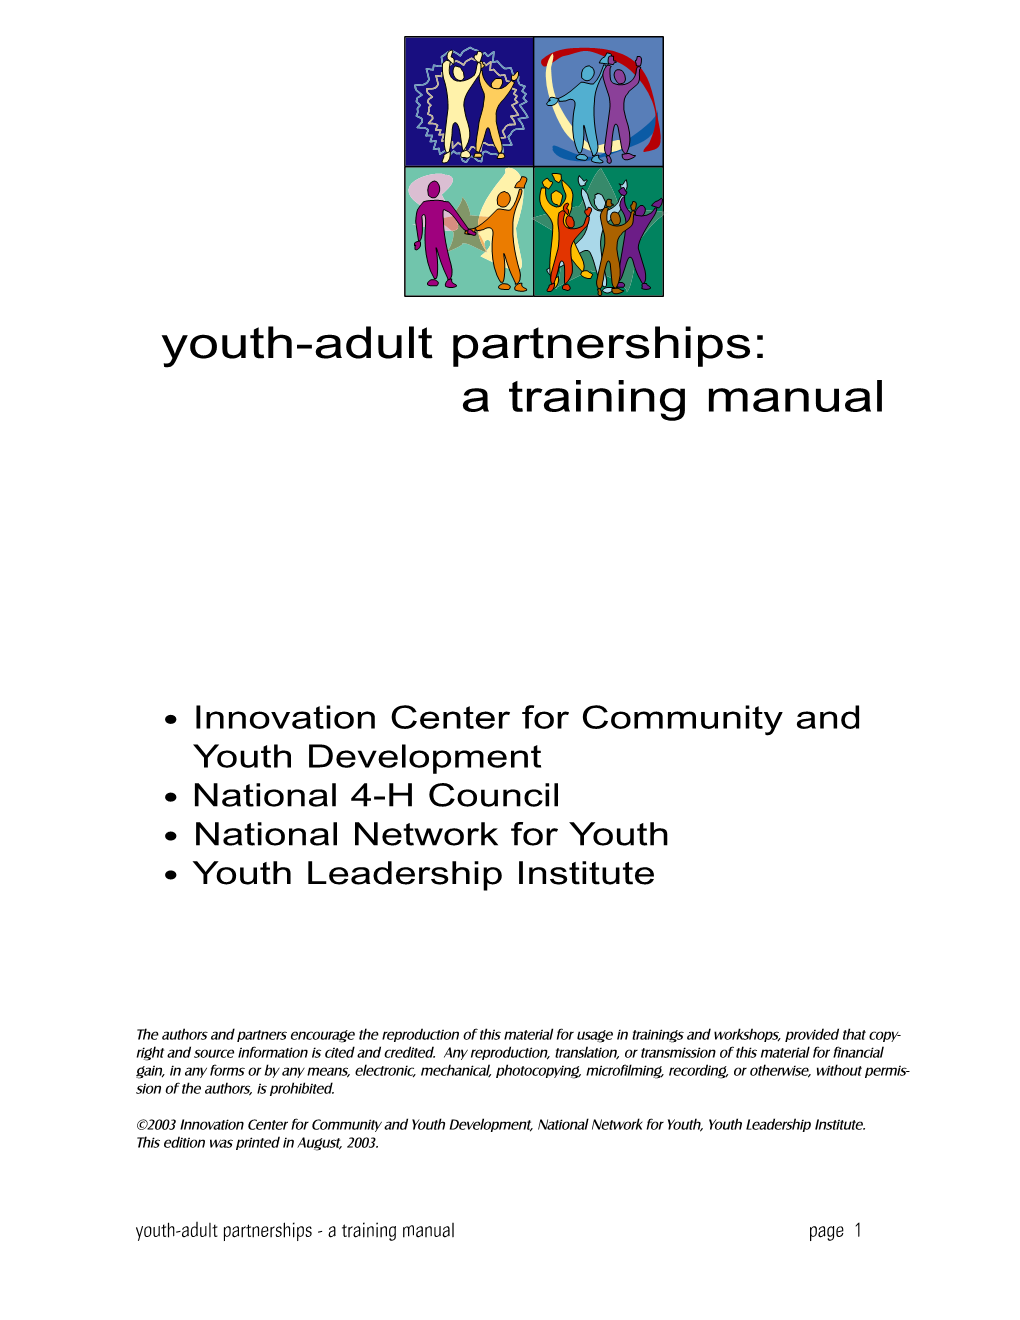 Youth-Adult Partnerships: a Training Manual